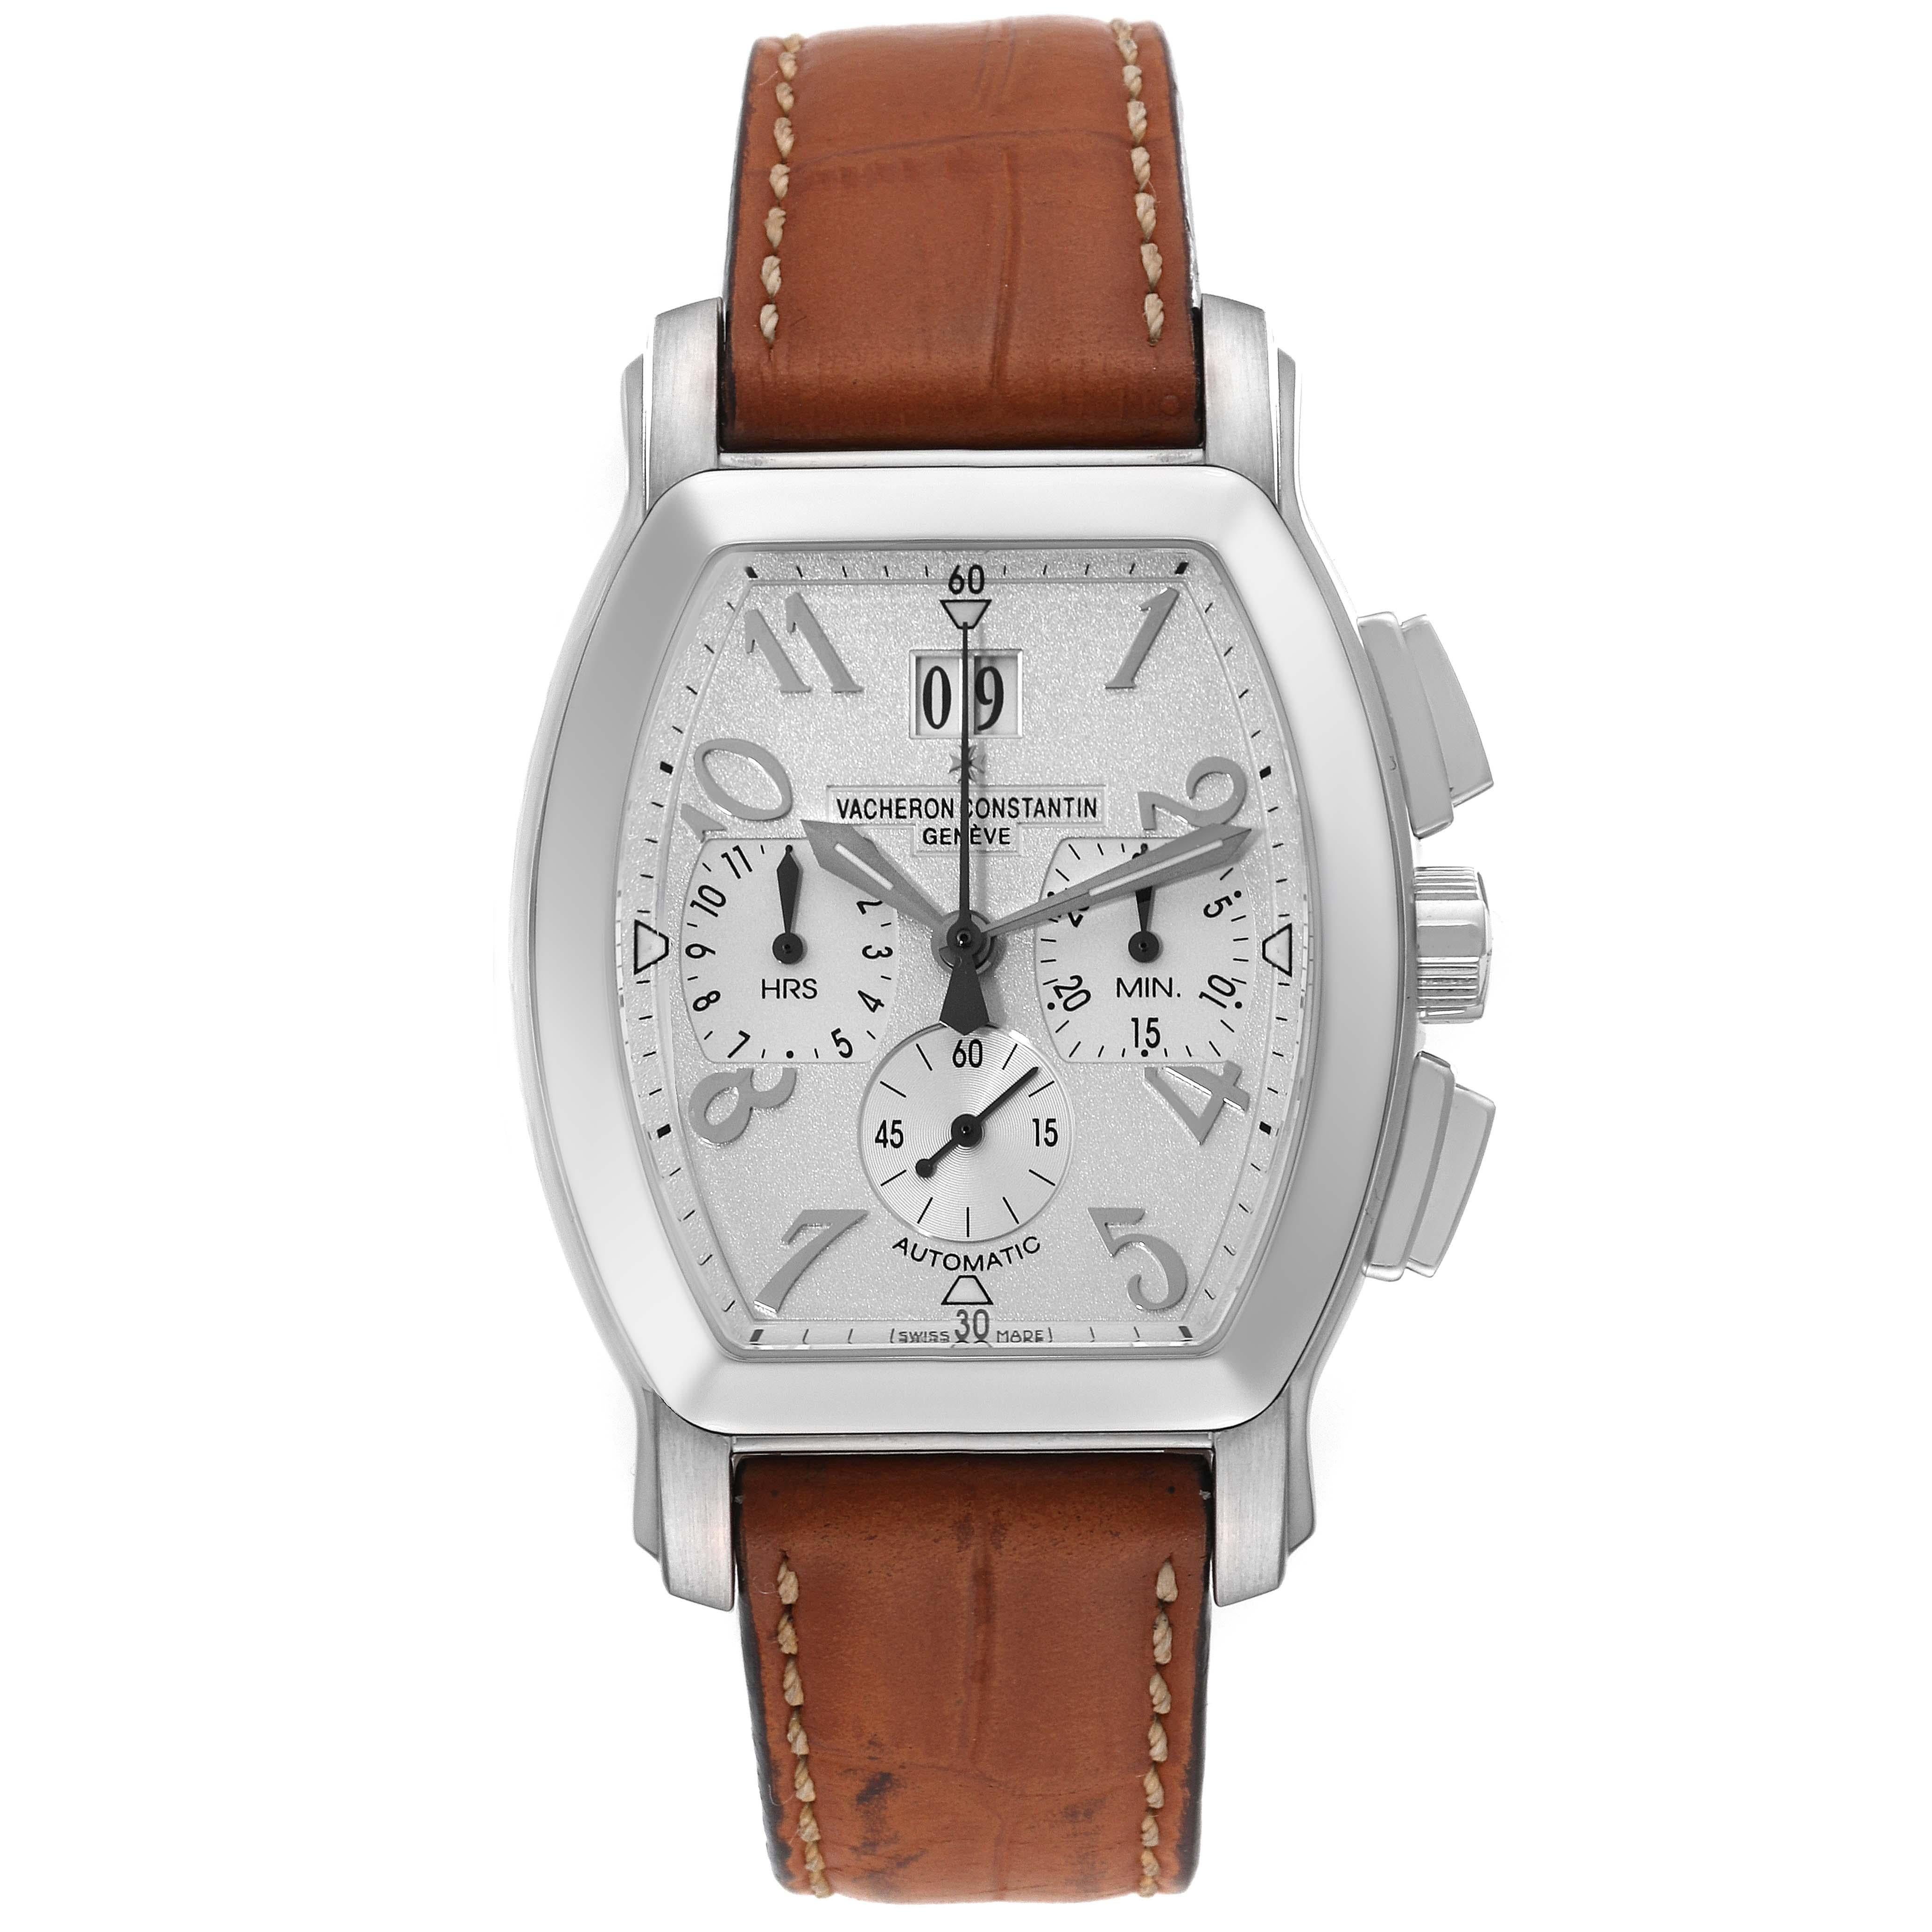 Vacheron Constantin Royal Eagle Chronograph Silver Dial Steel Mens Watch 49145. Automatic self-winding movement.  Rhodium-plated, fausses cotes decoration, straight-line lever escapement, monometallic balance adjusted to 5 positions, shock absorber,